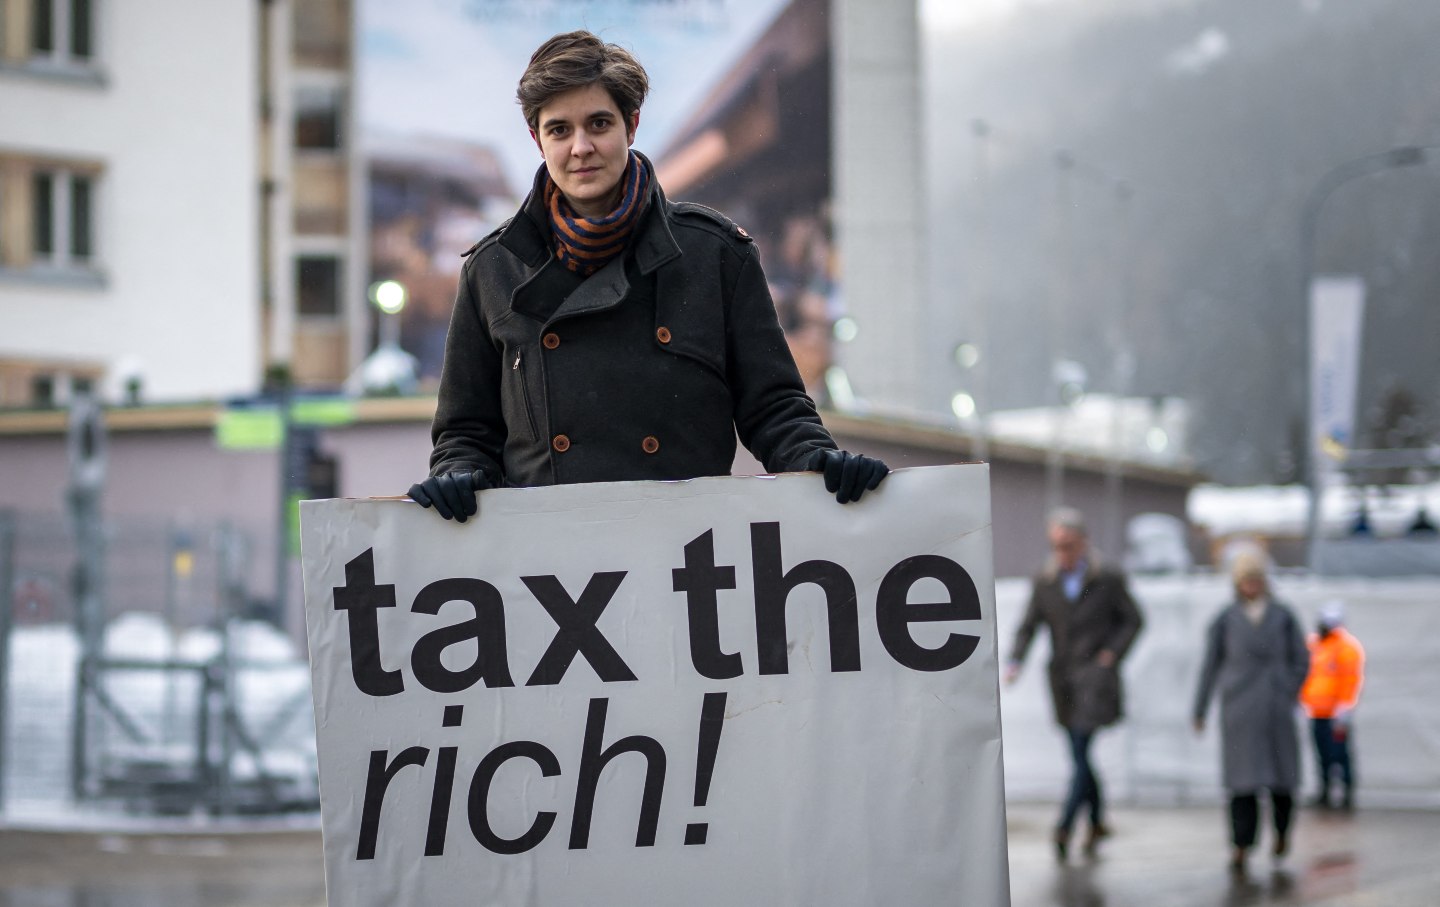 Austrian Marlene Engelhorn, whose family owns Germany's chemical giant BASF, poses with a placard reading “tax the rich!”